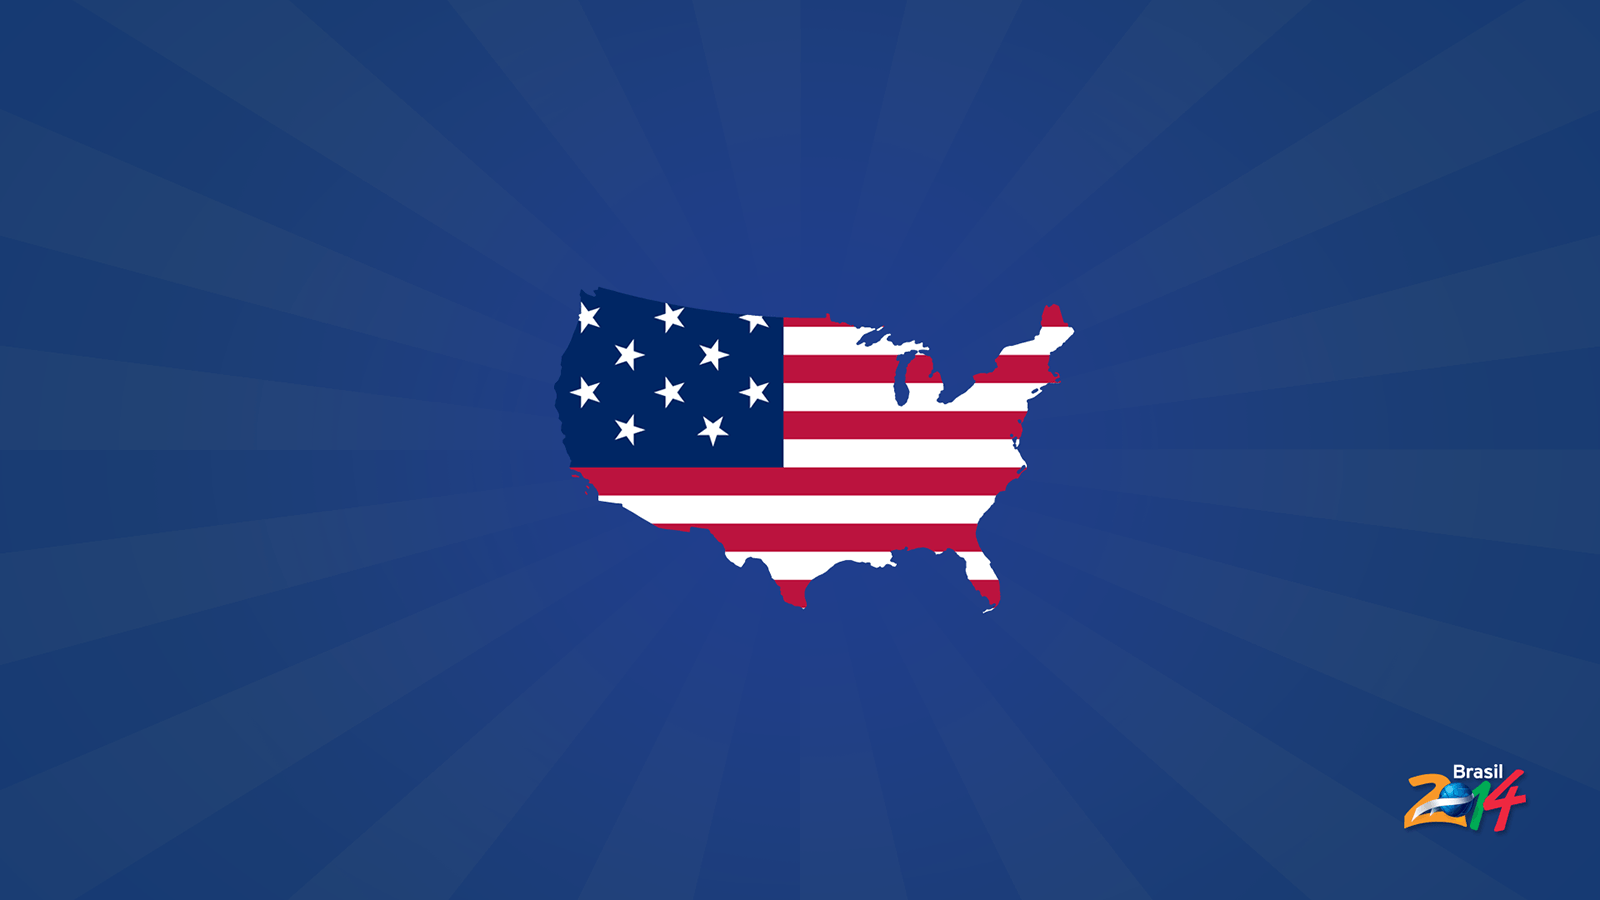 United states of america wallpapers 2K Gallery